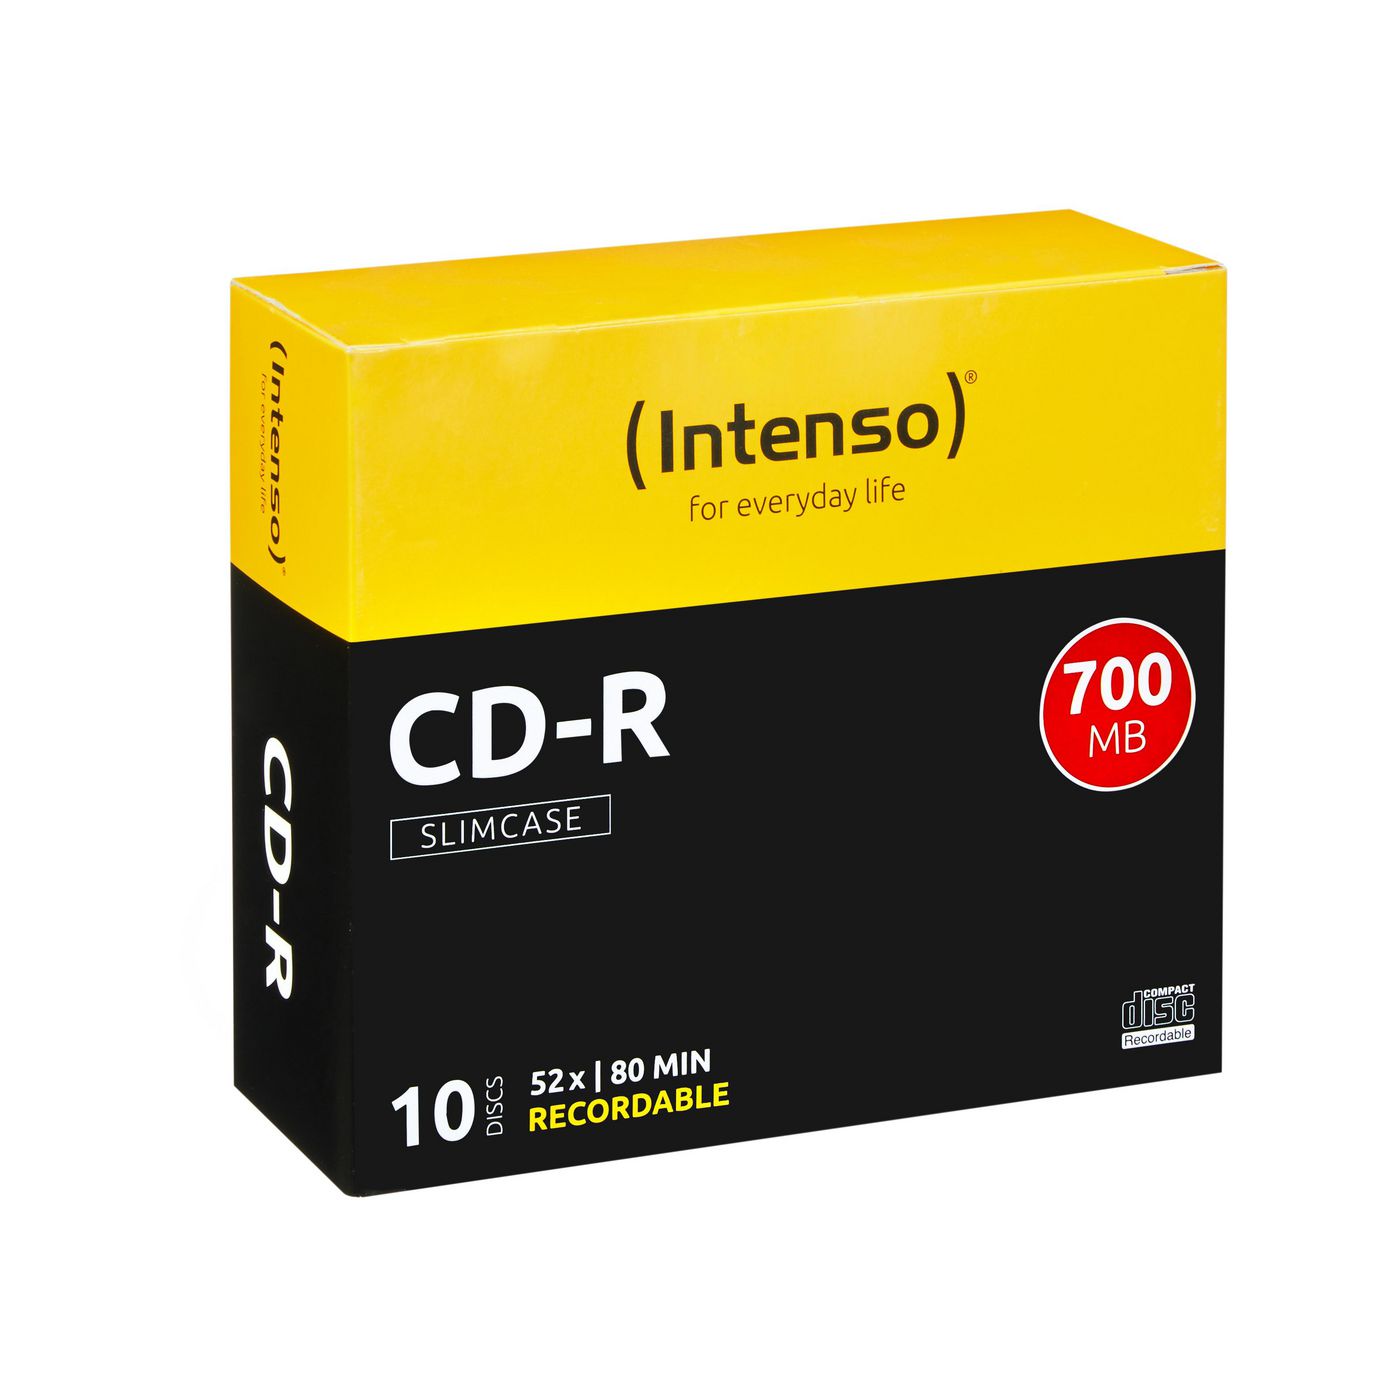 Intenso 1001622 CD-R 700Mb 52x slimcase 10 